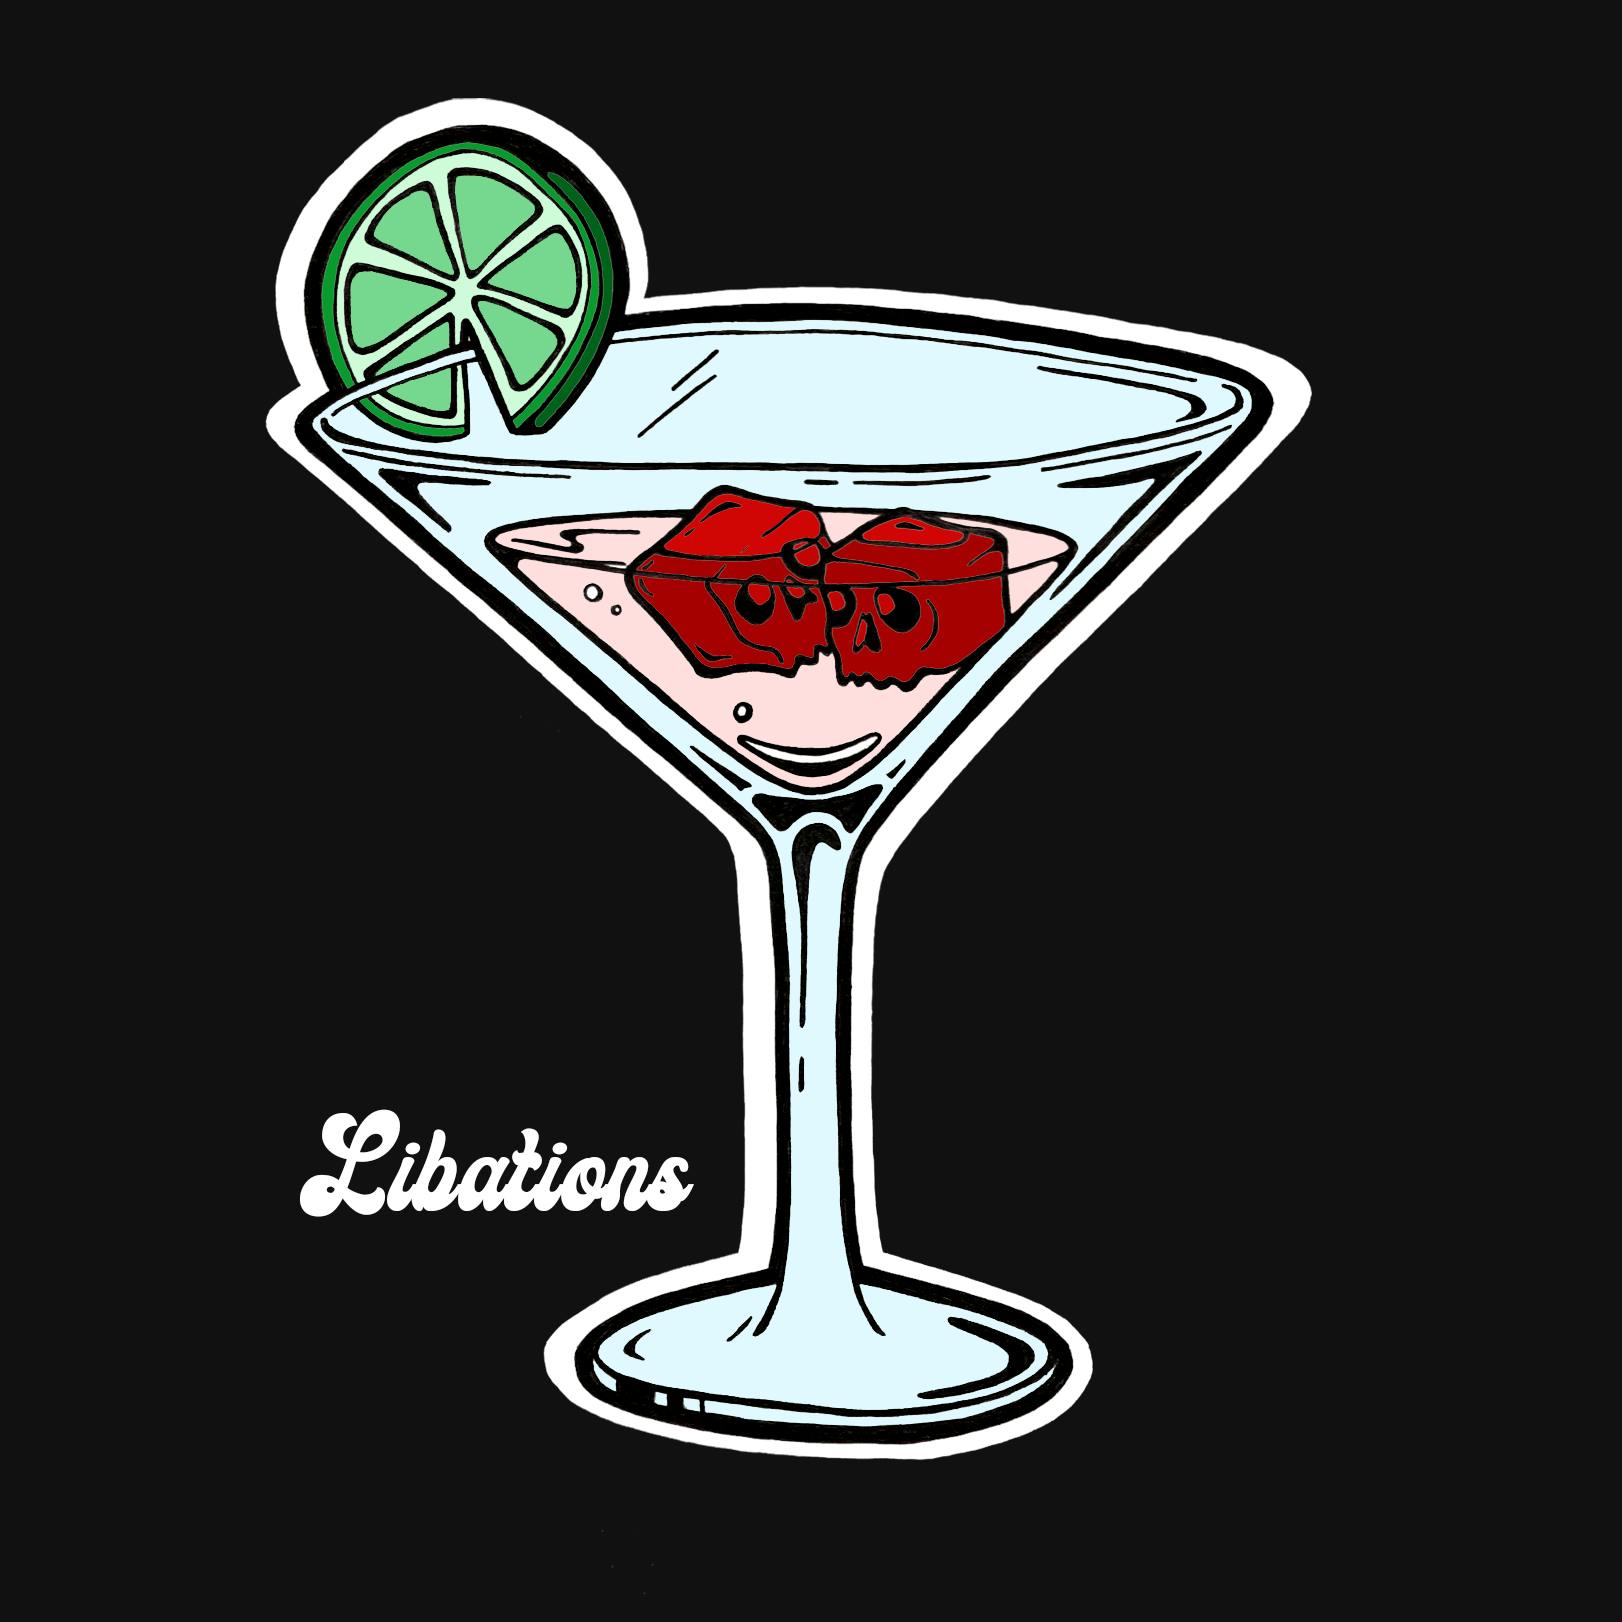 New Single ‘Libations’ out 17.03.22